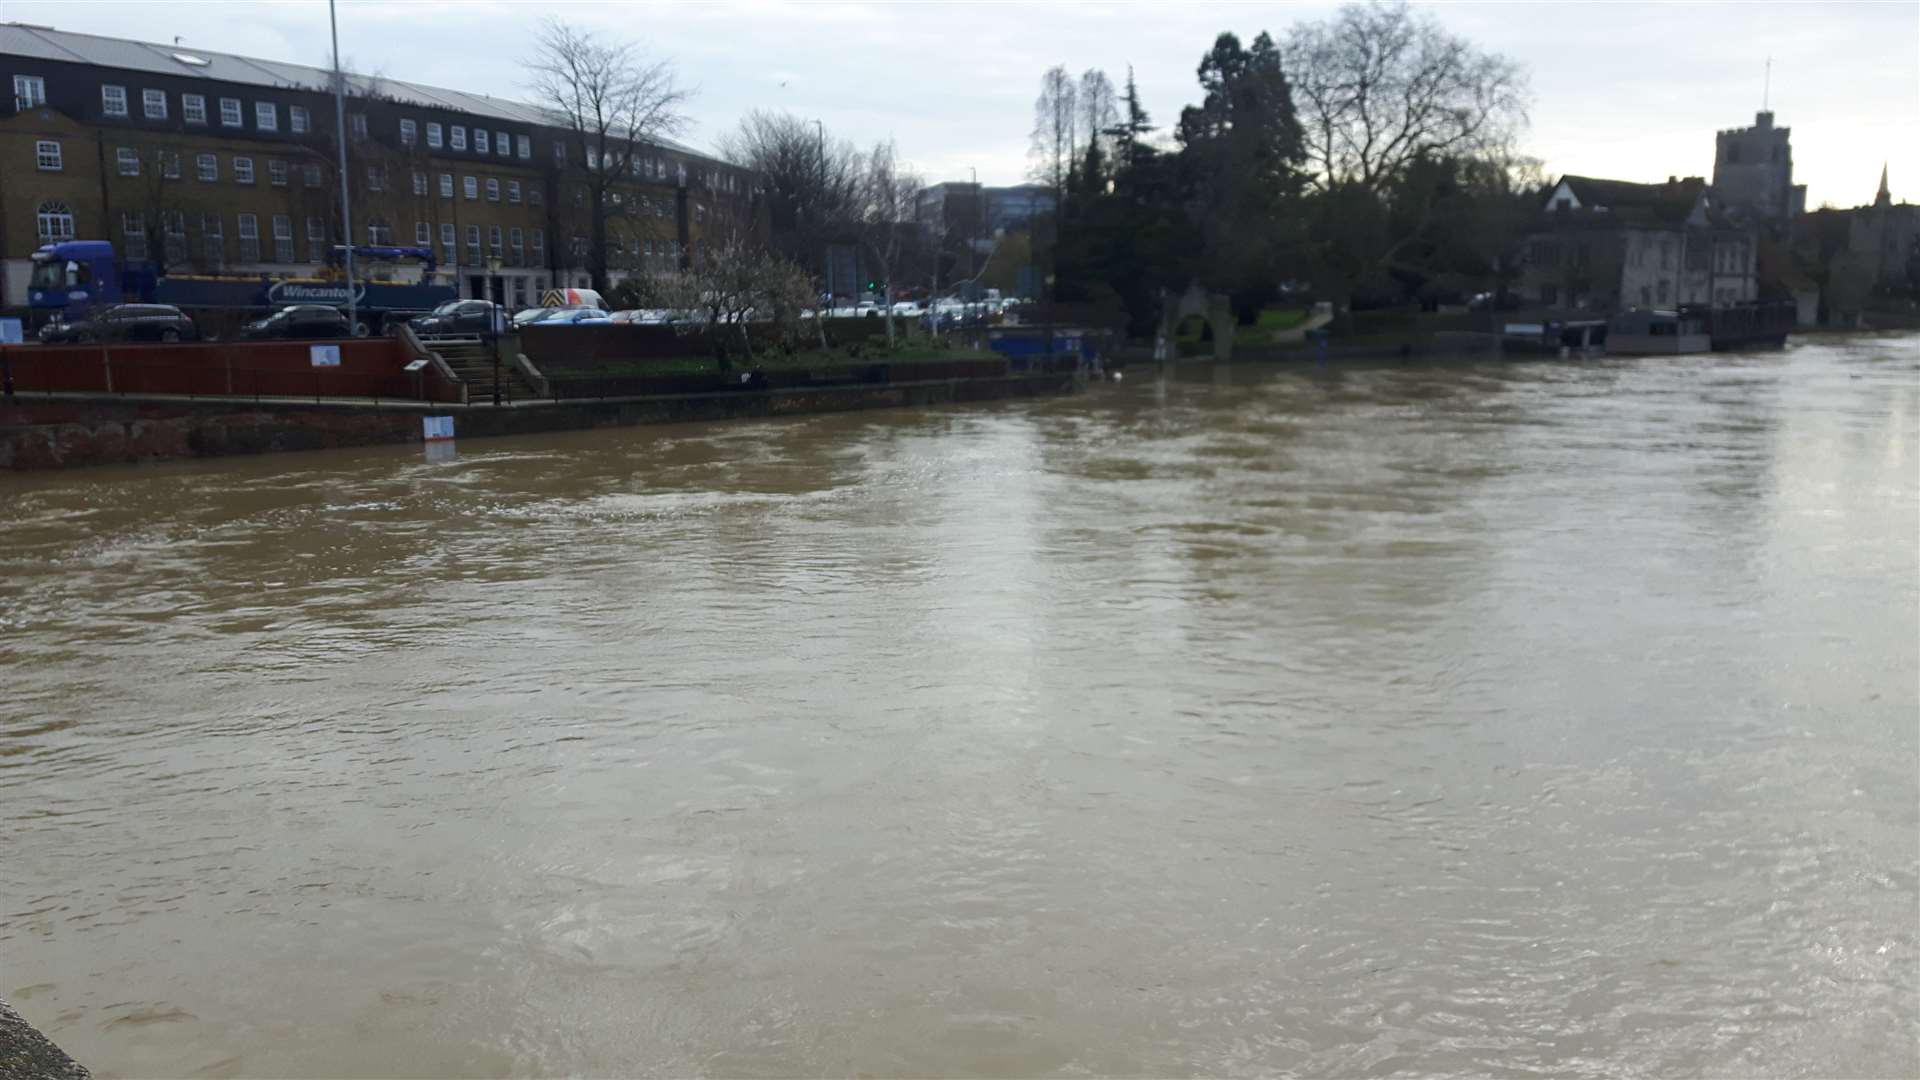 The River Medway in Maidstone has been affected by the heavy rainfall